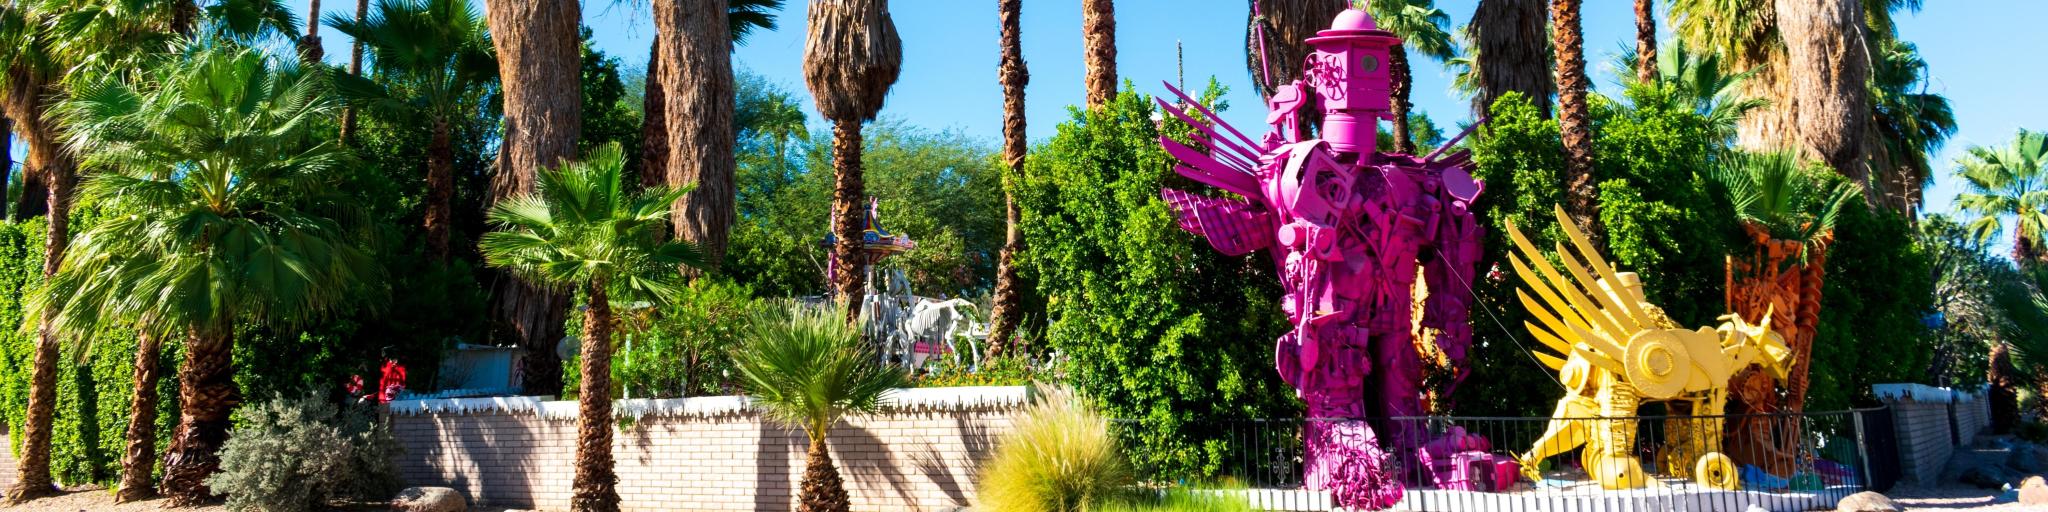 Bright pink and yellow Robolights artwork sculpture installation, surrounded by palm trees, Palm Springs, California